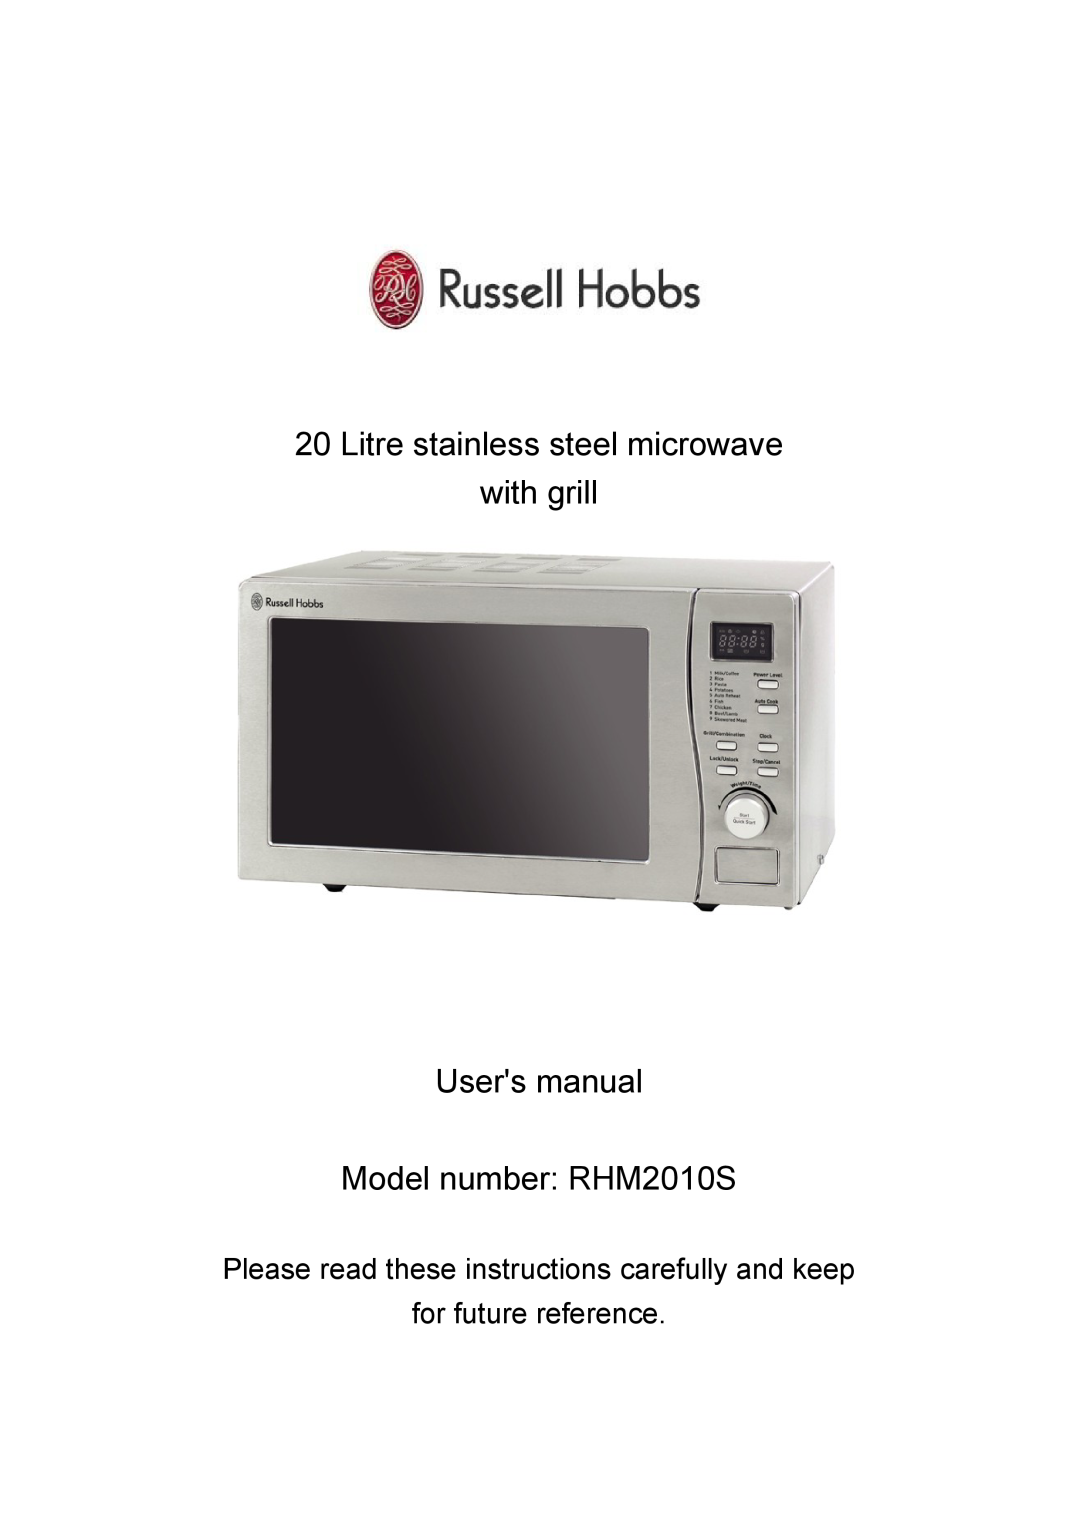 Russell Hobbs RHM2010S instruction manual Litre Digital Microwave With Grill, Please read these instructions carefully and 